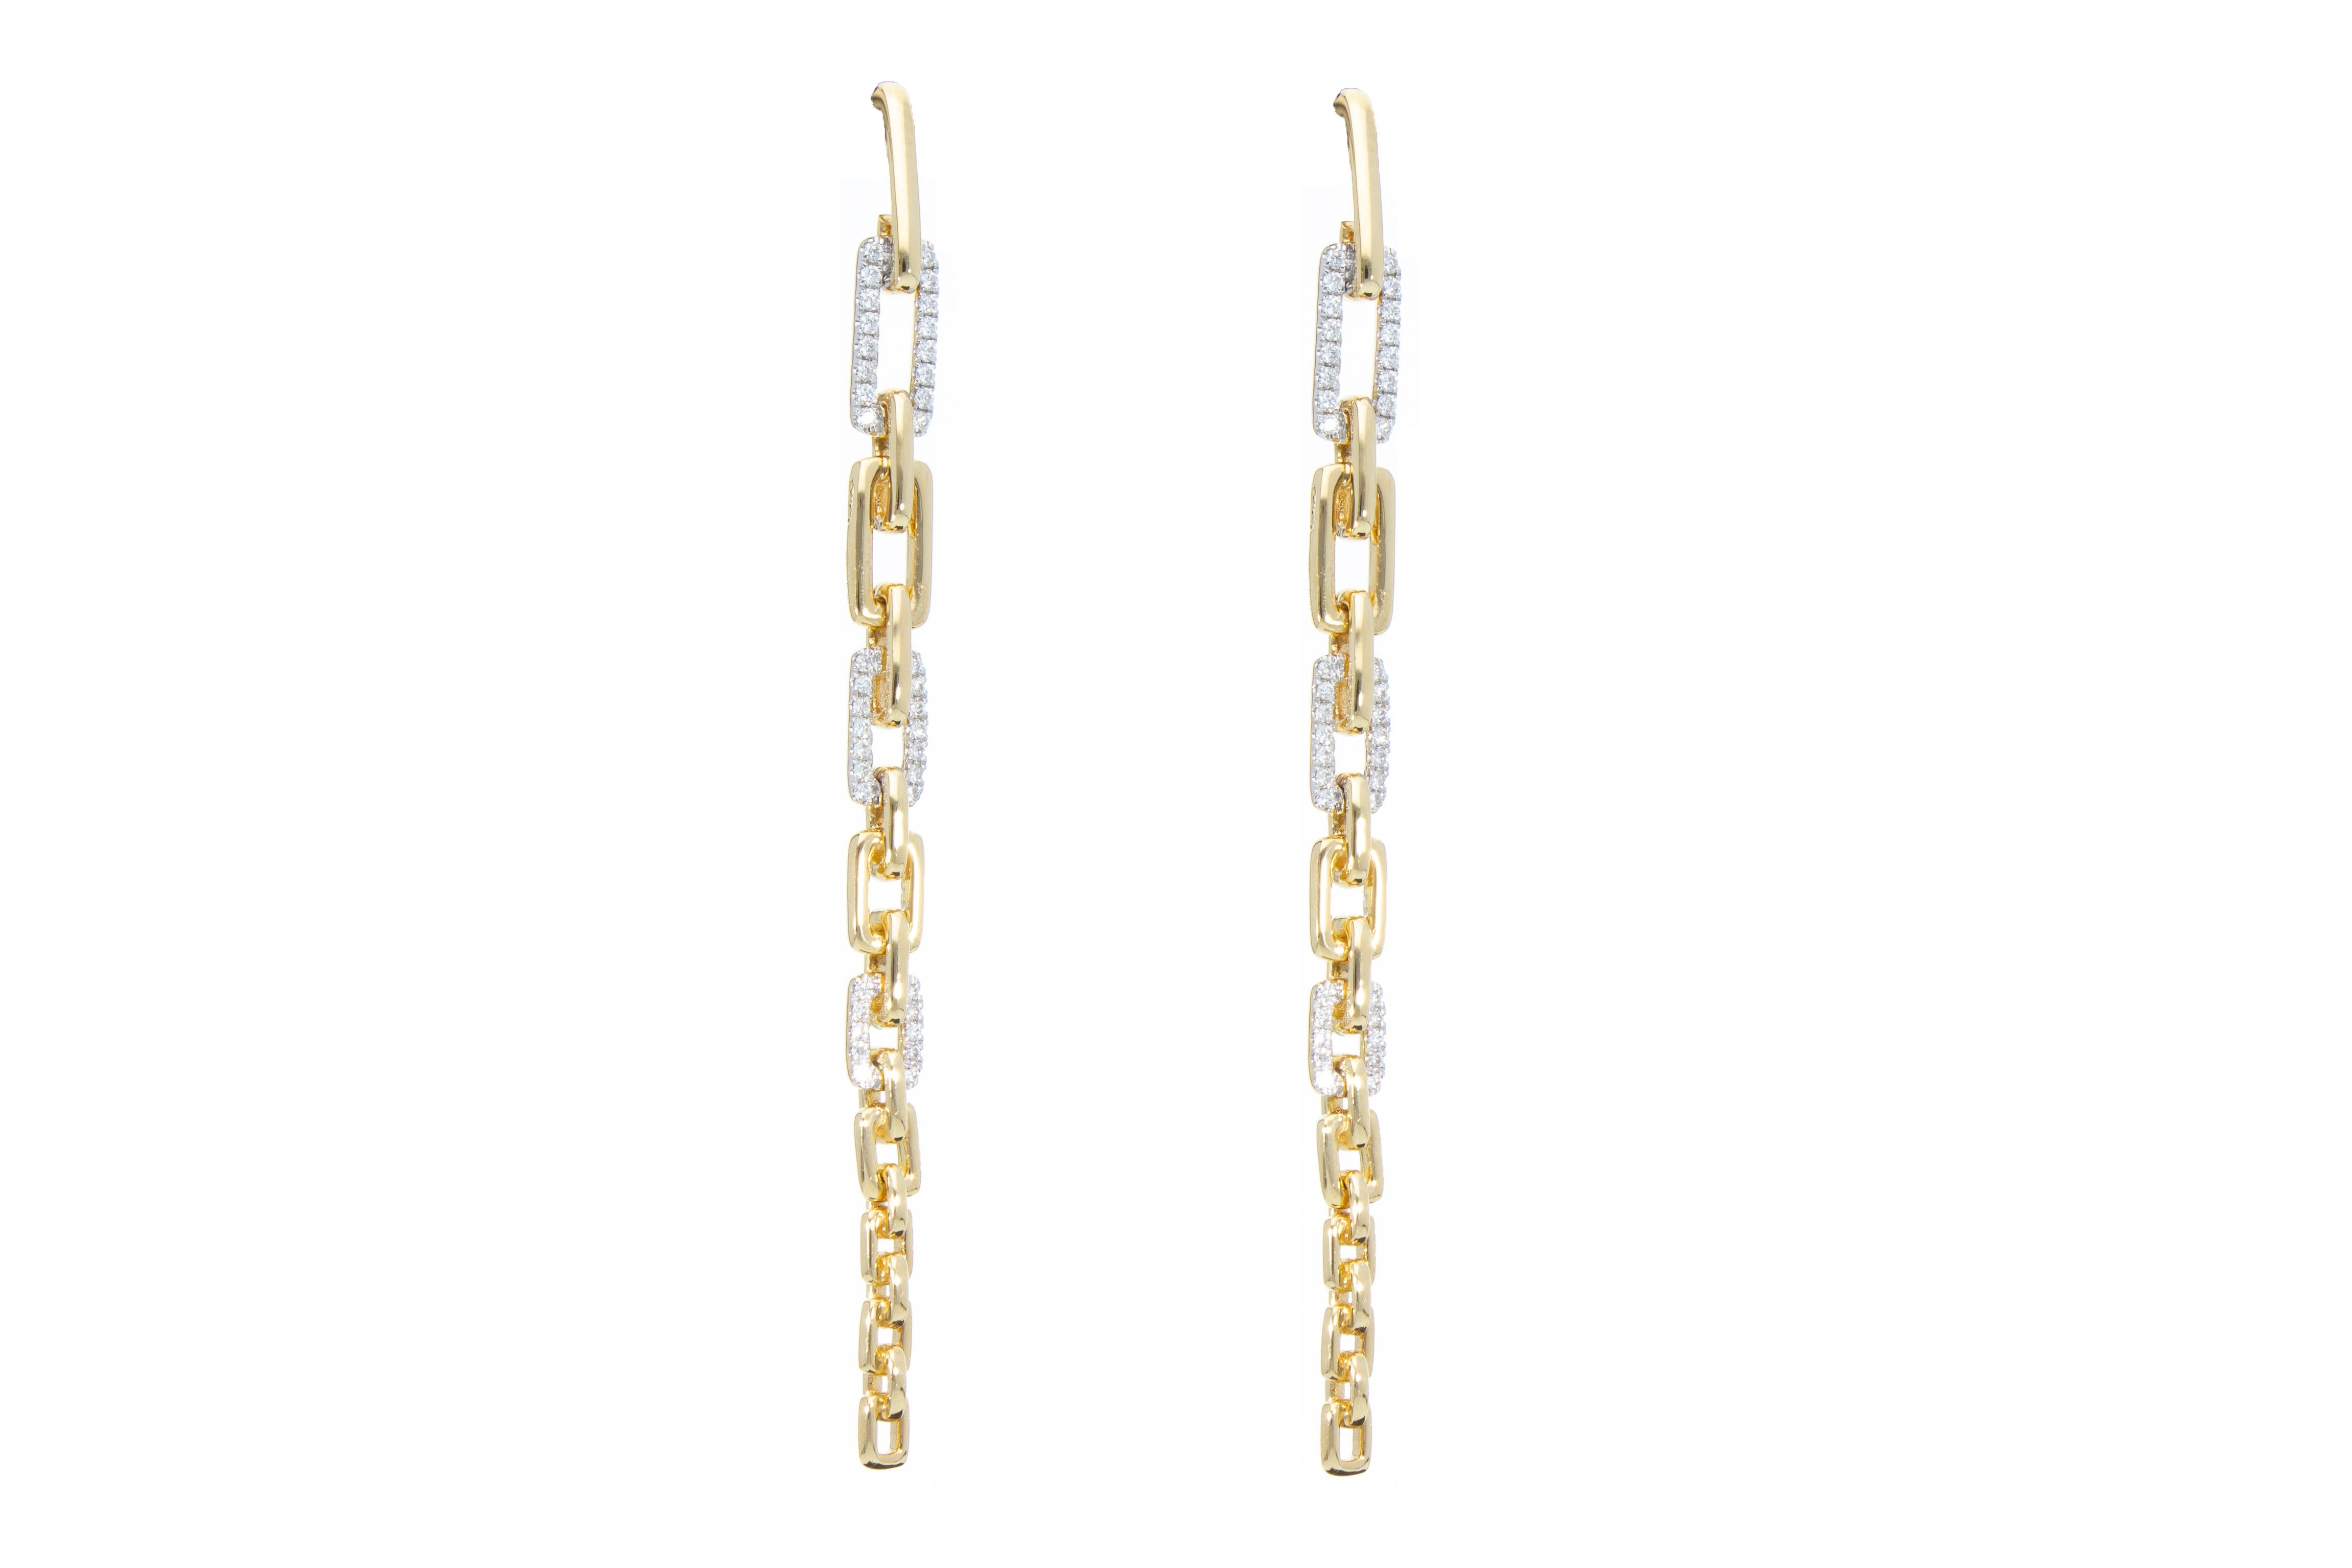 Diamonds Ct 0.35 Pendant Earrings with Rectangular Links 18k Gold Made in Italy For Sale 3